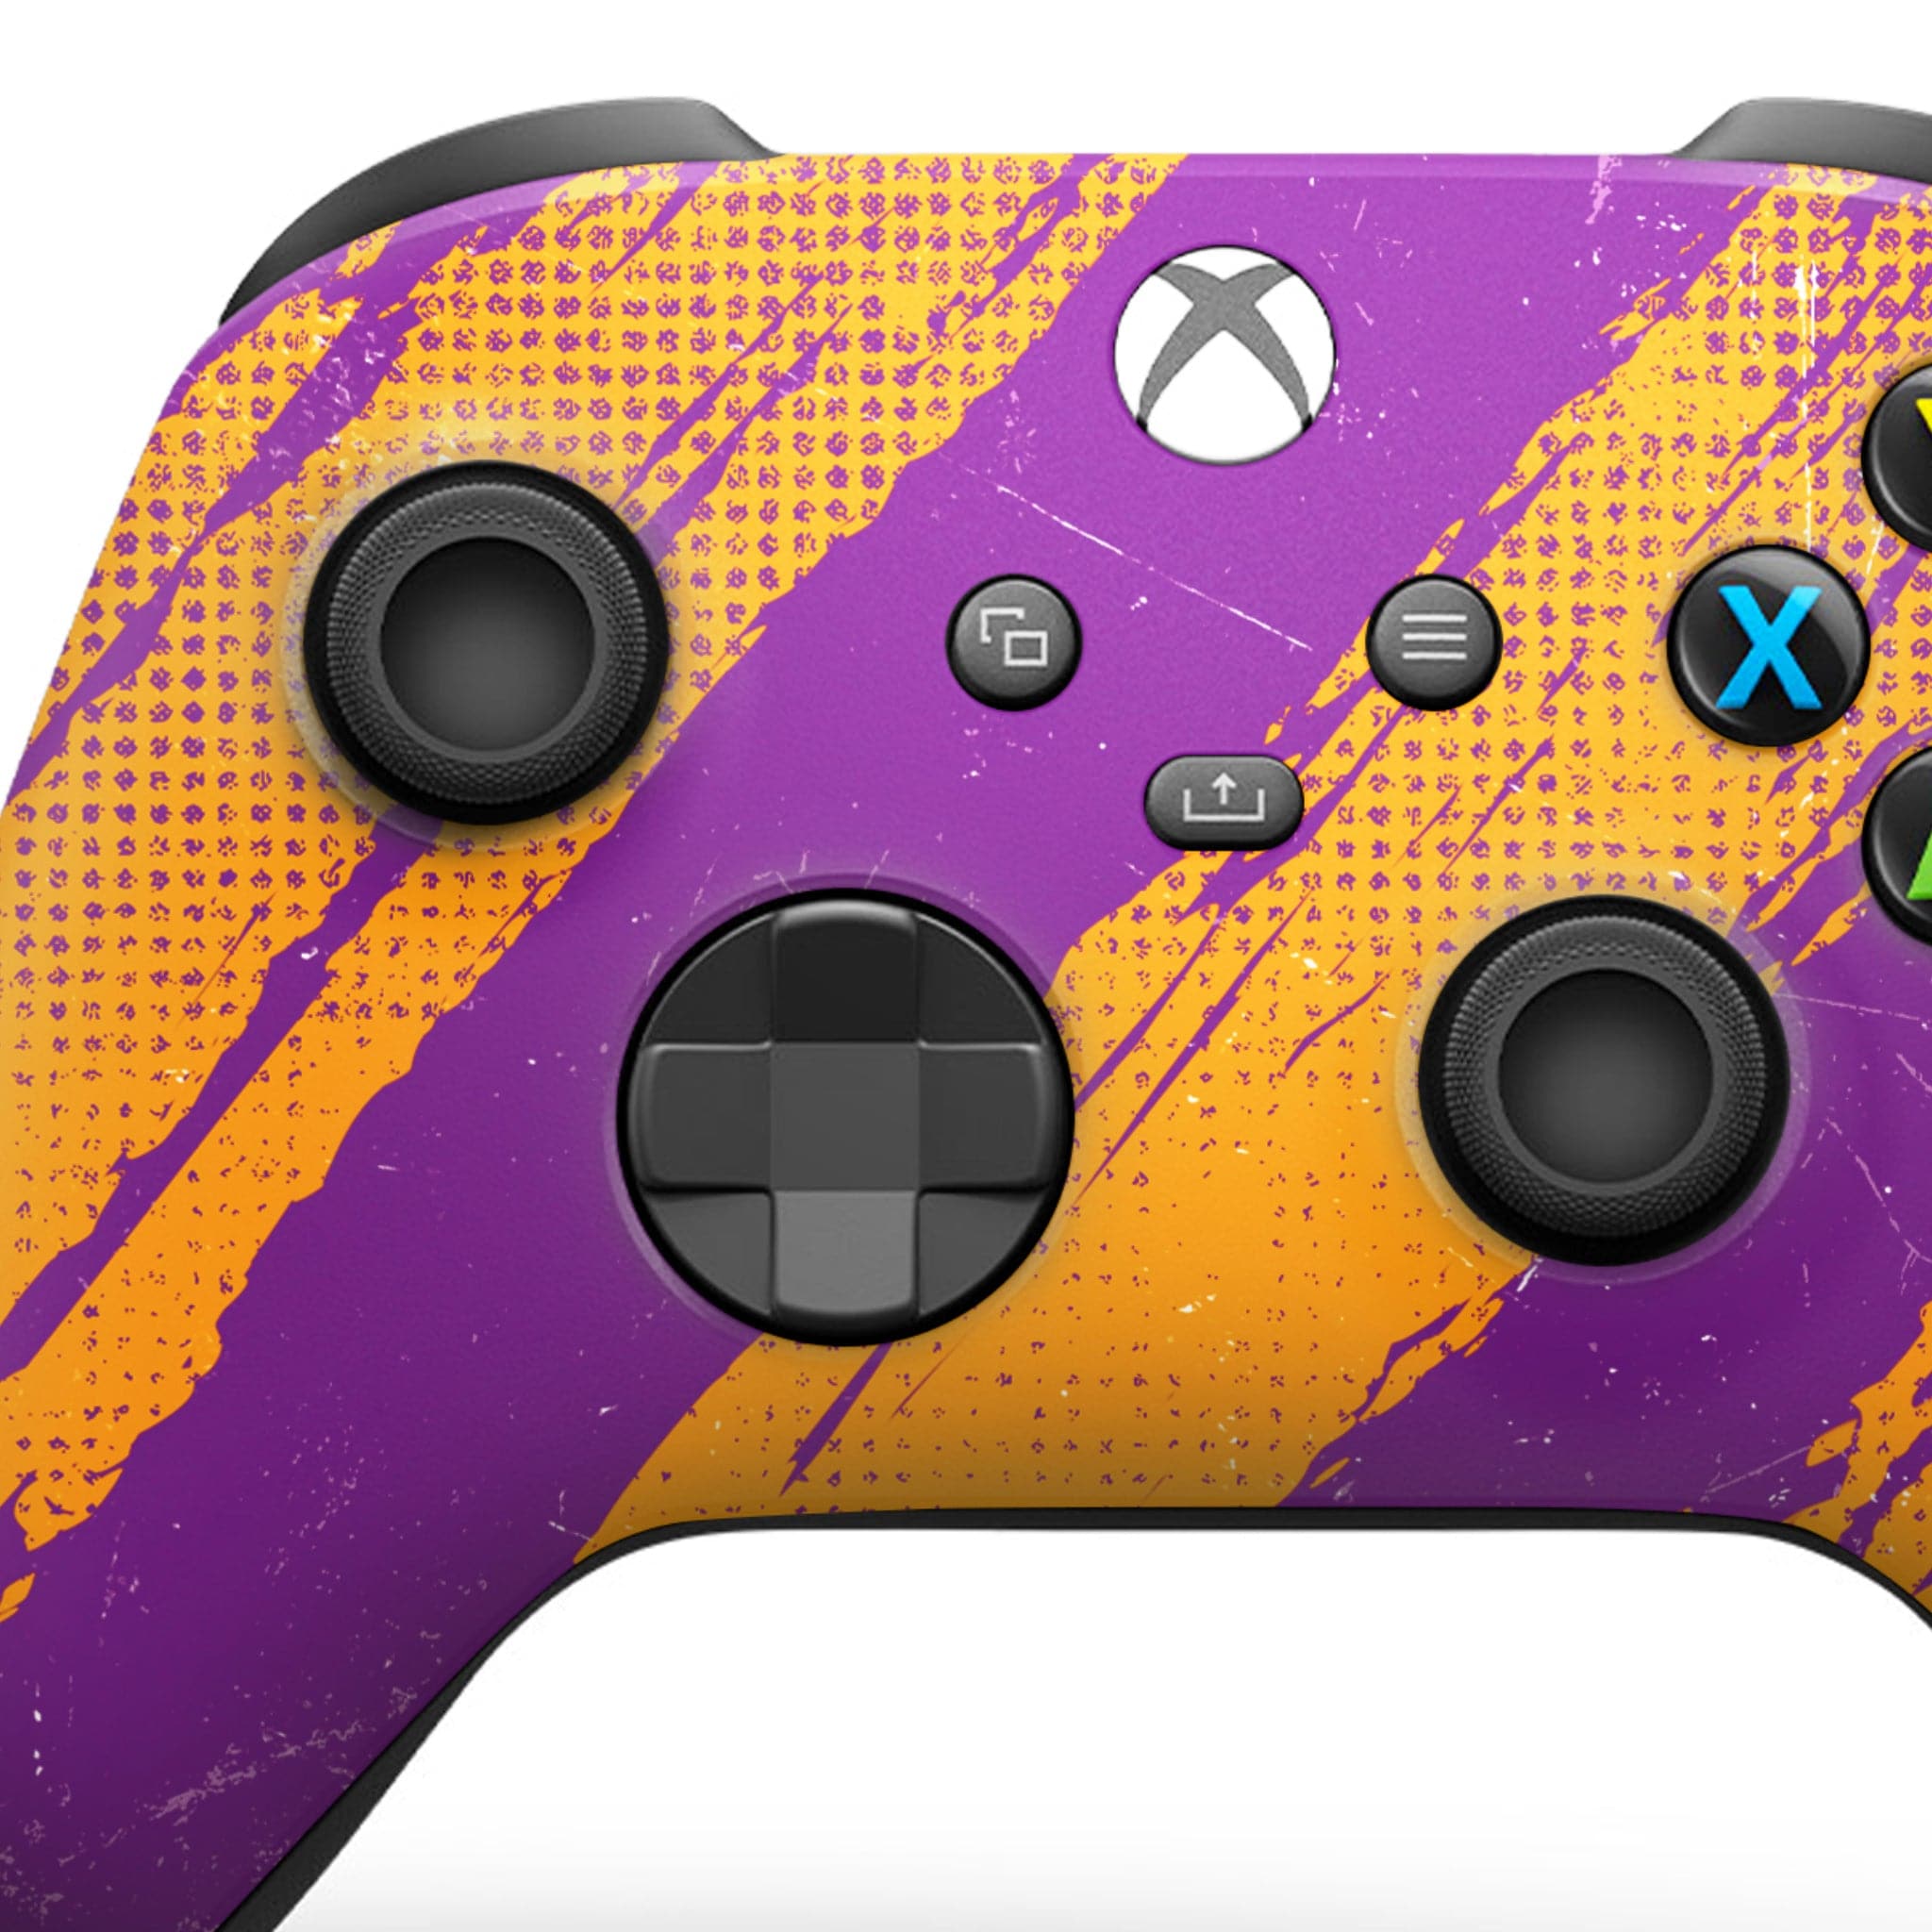 Ripper Candy Xbox Series X Controller